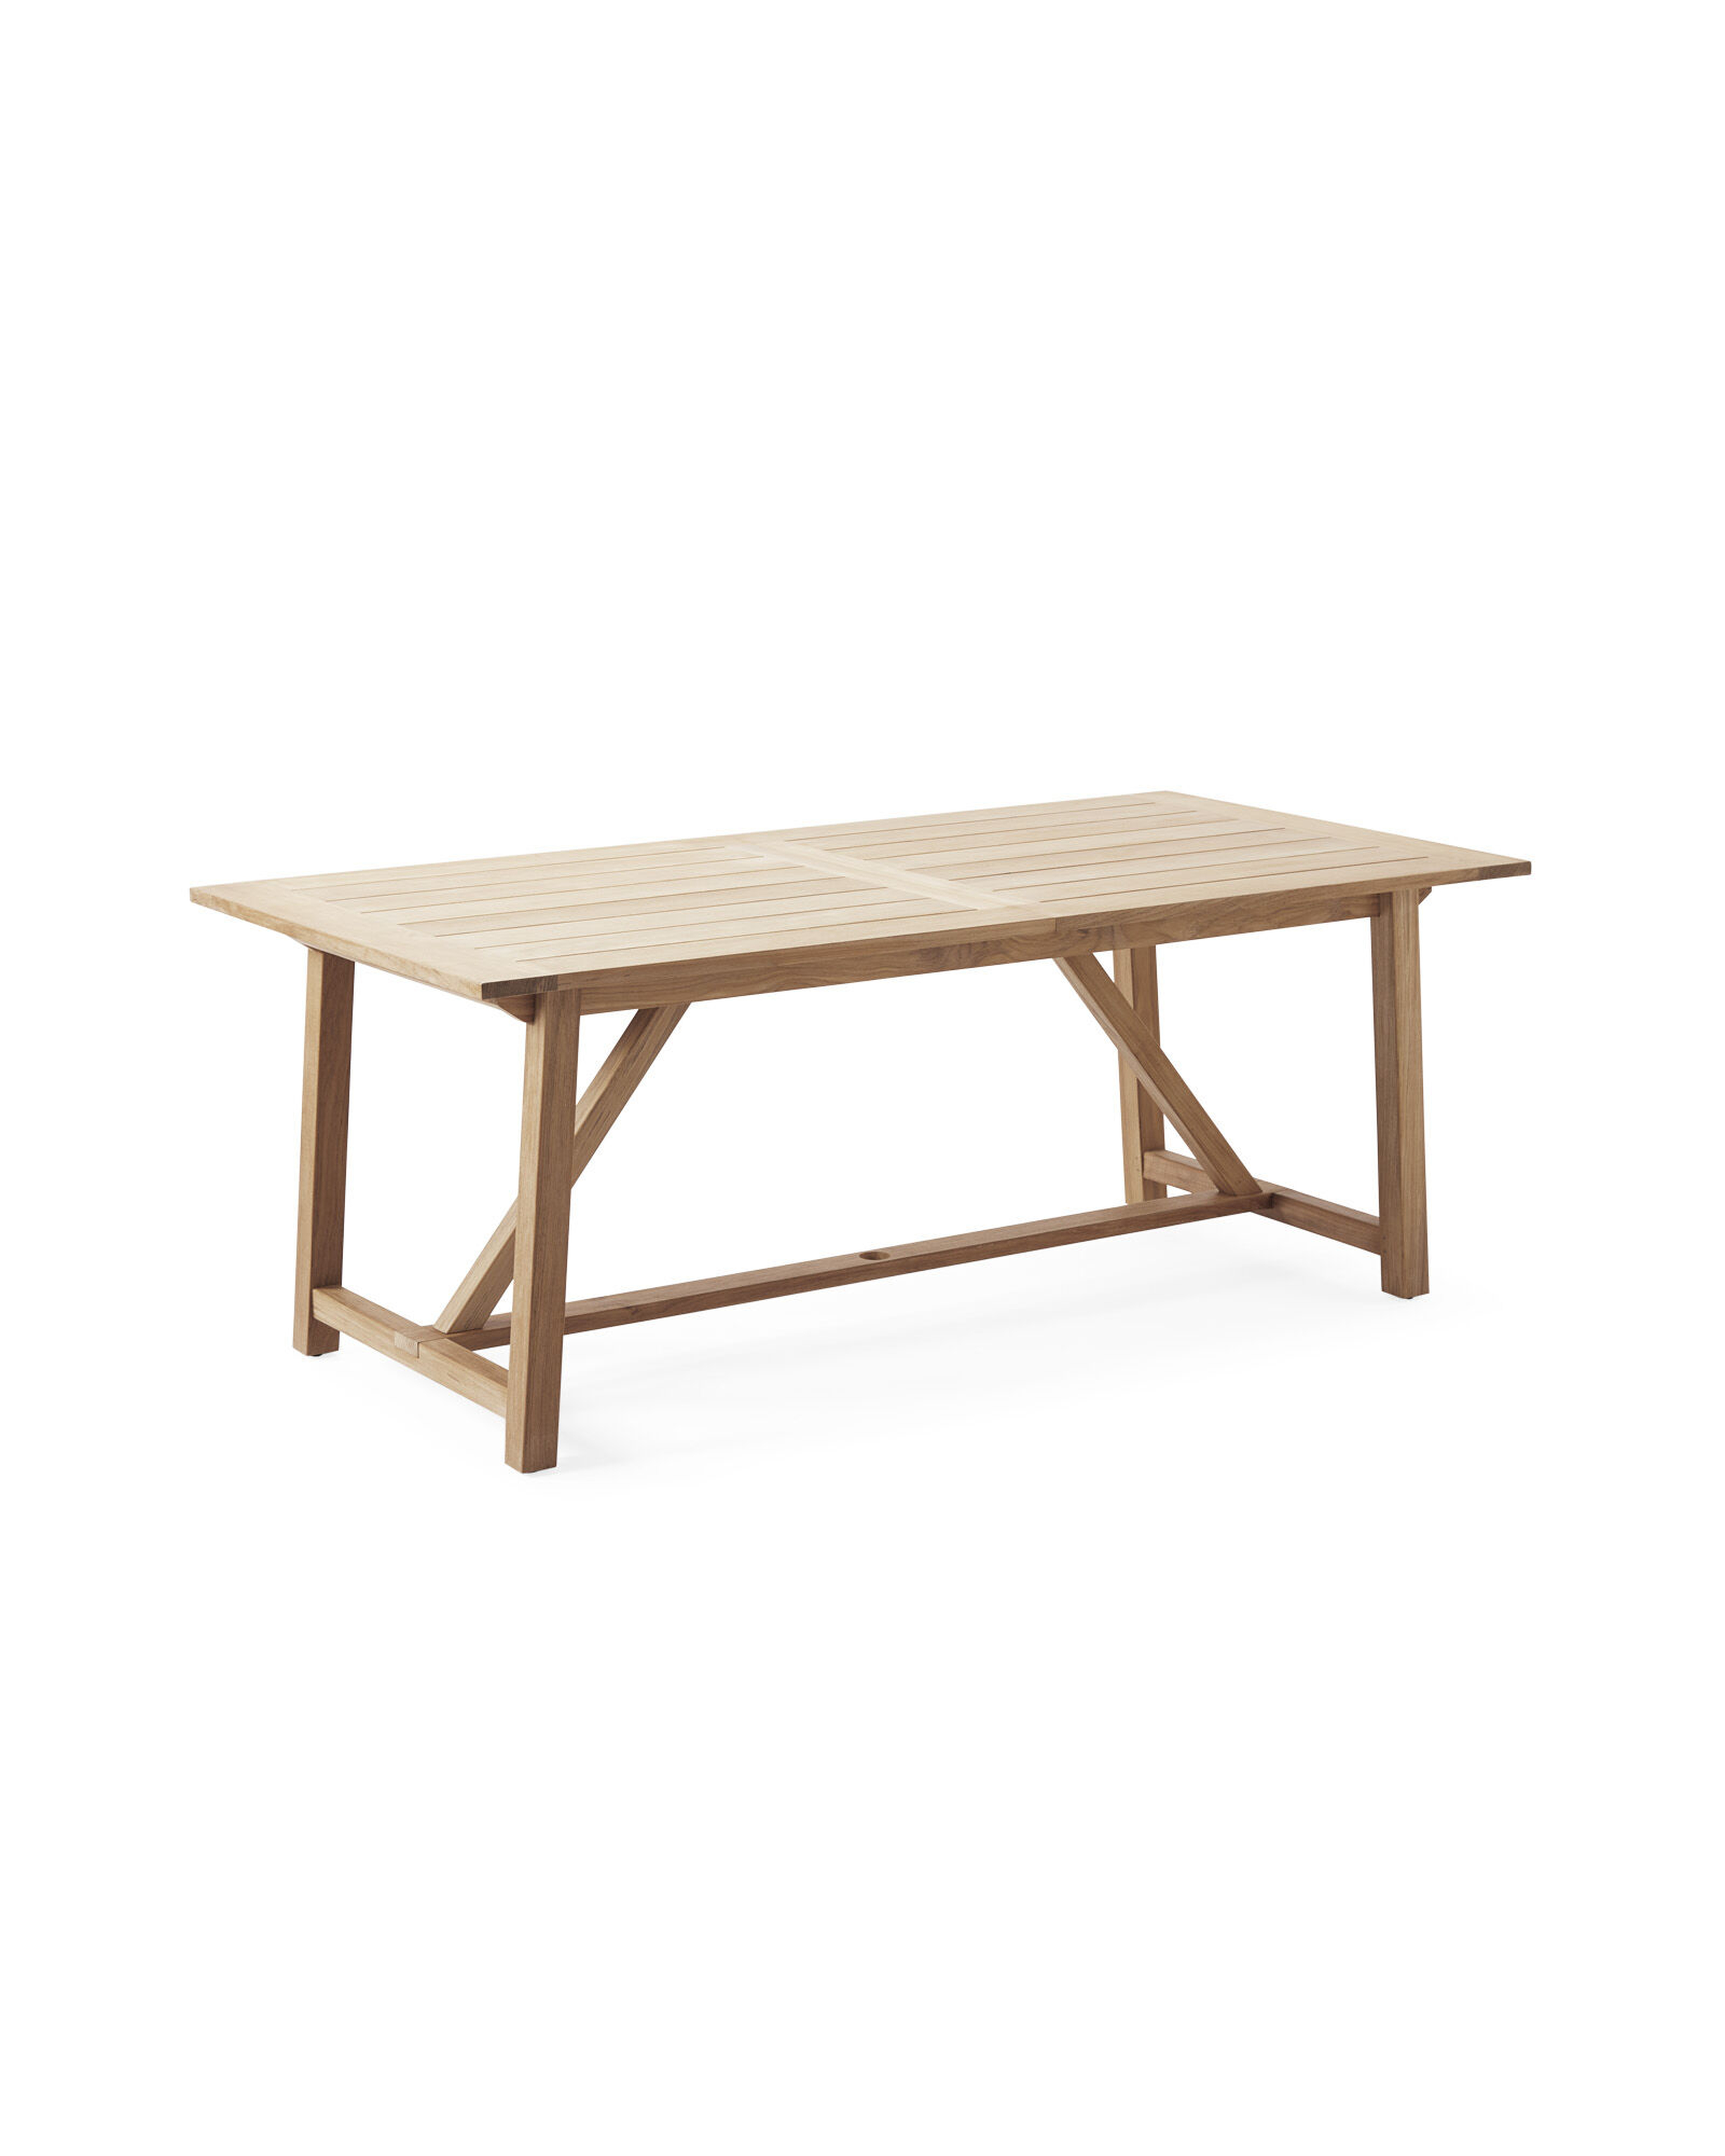 Crosby Teak Expandable Dining Table – Natural - Serena and Lily